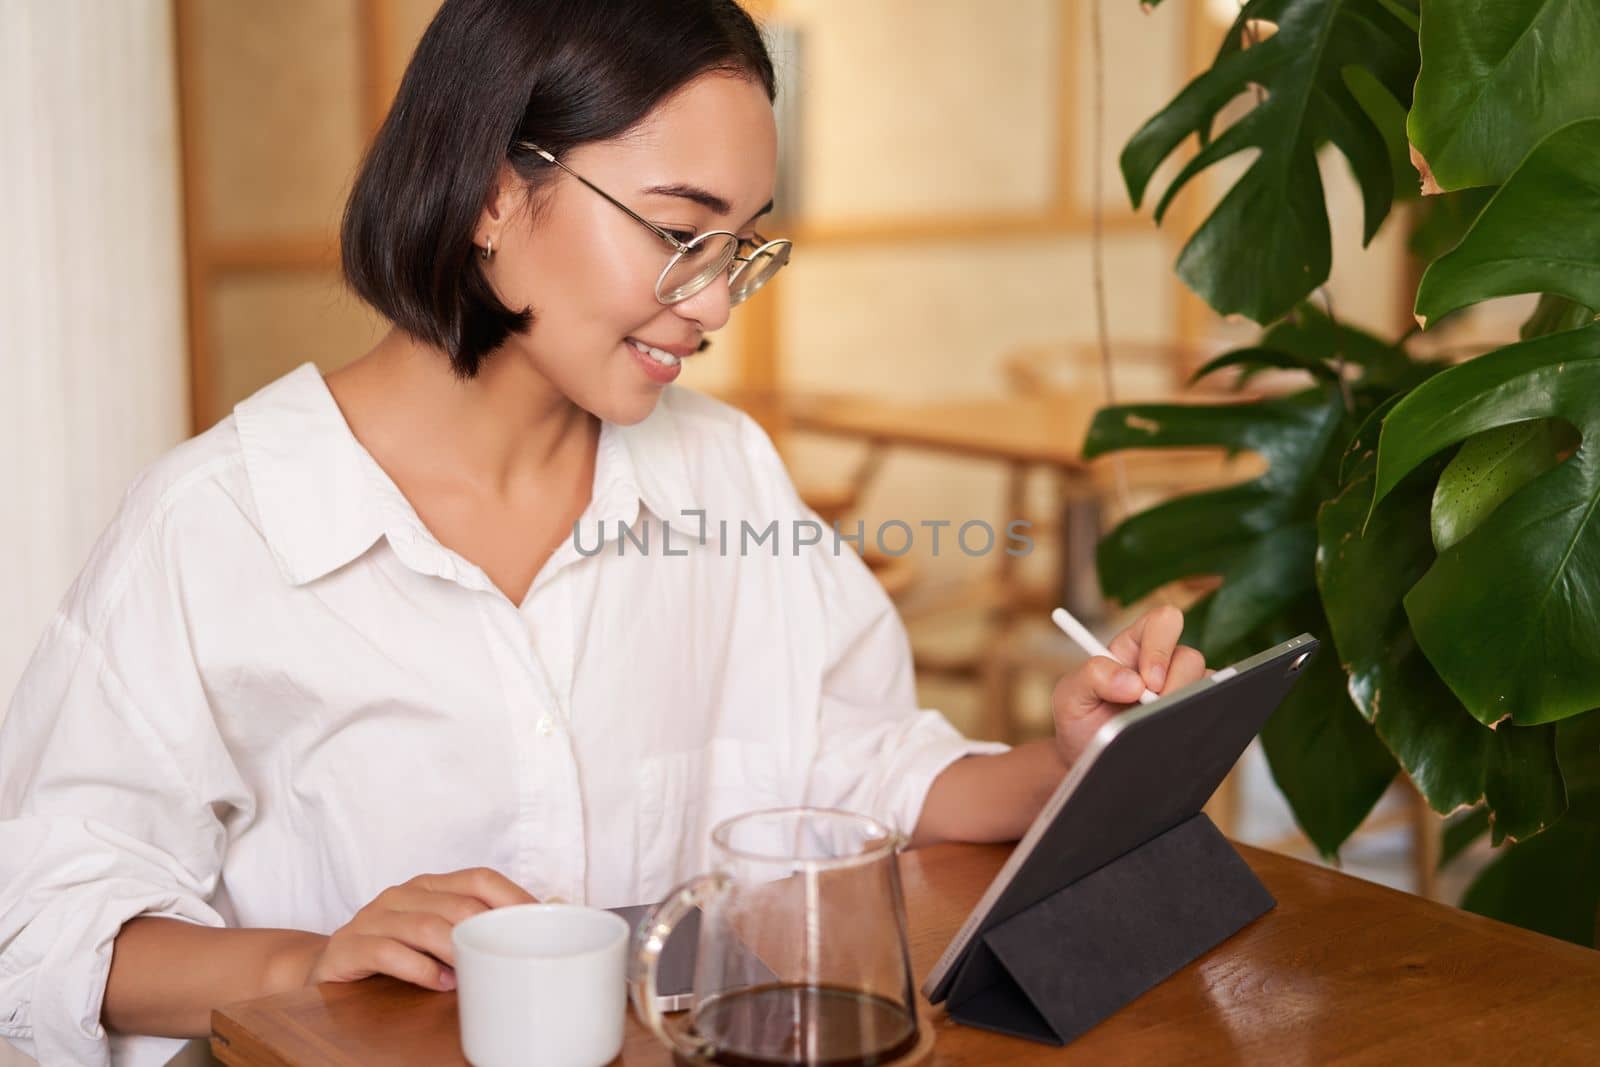 Portrait of beautiful young woman sitting in cafe, drinking coffee and drawing diagram on tablet with graphic pen, smiling pleased.